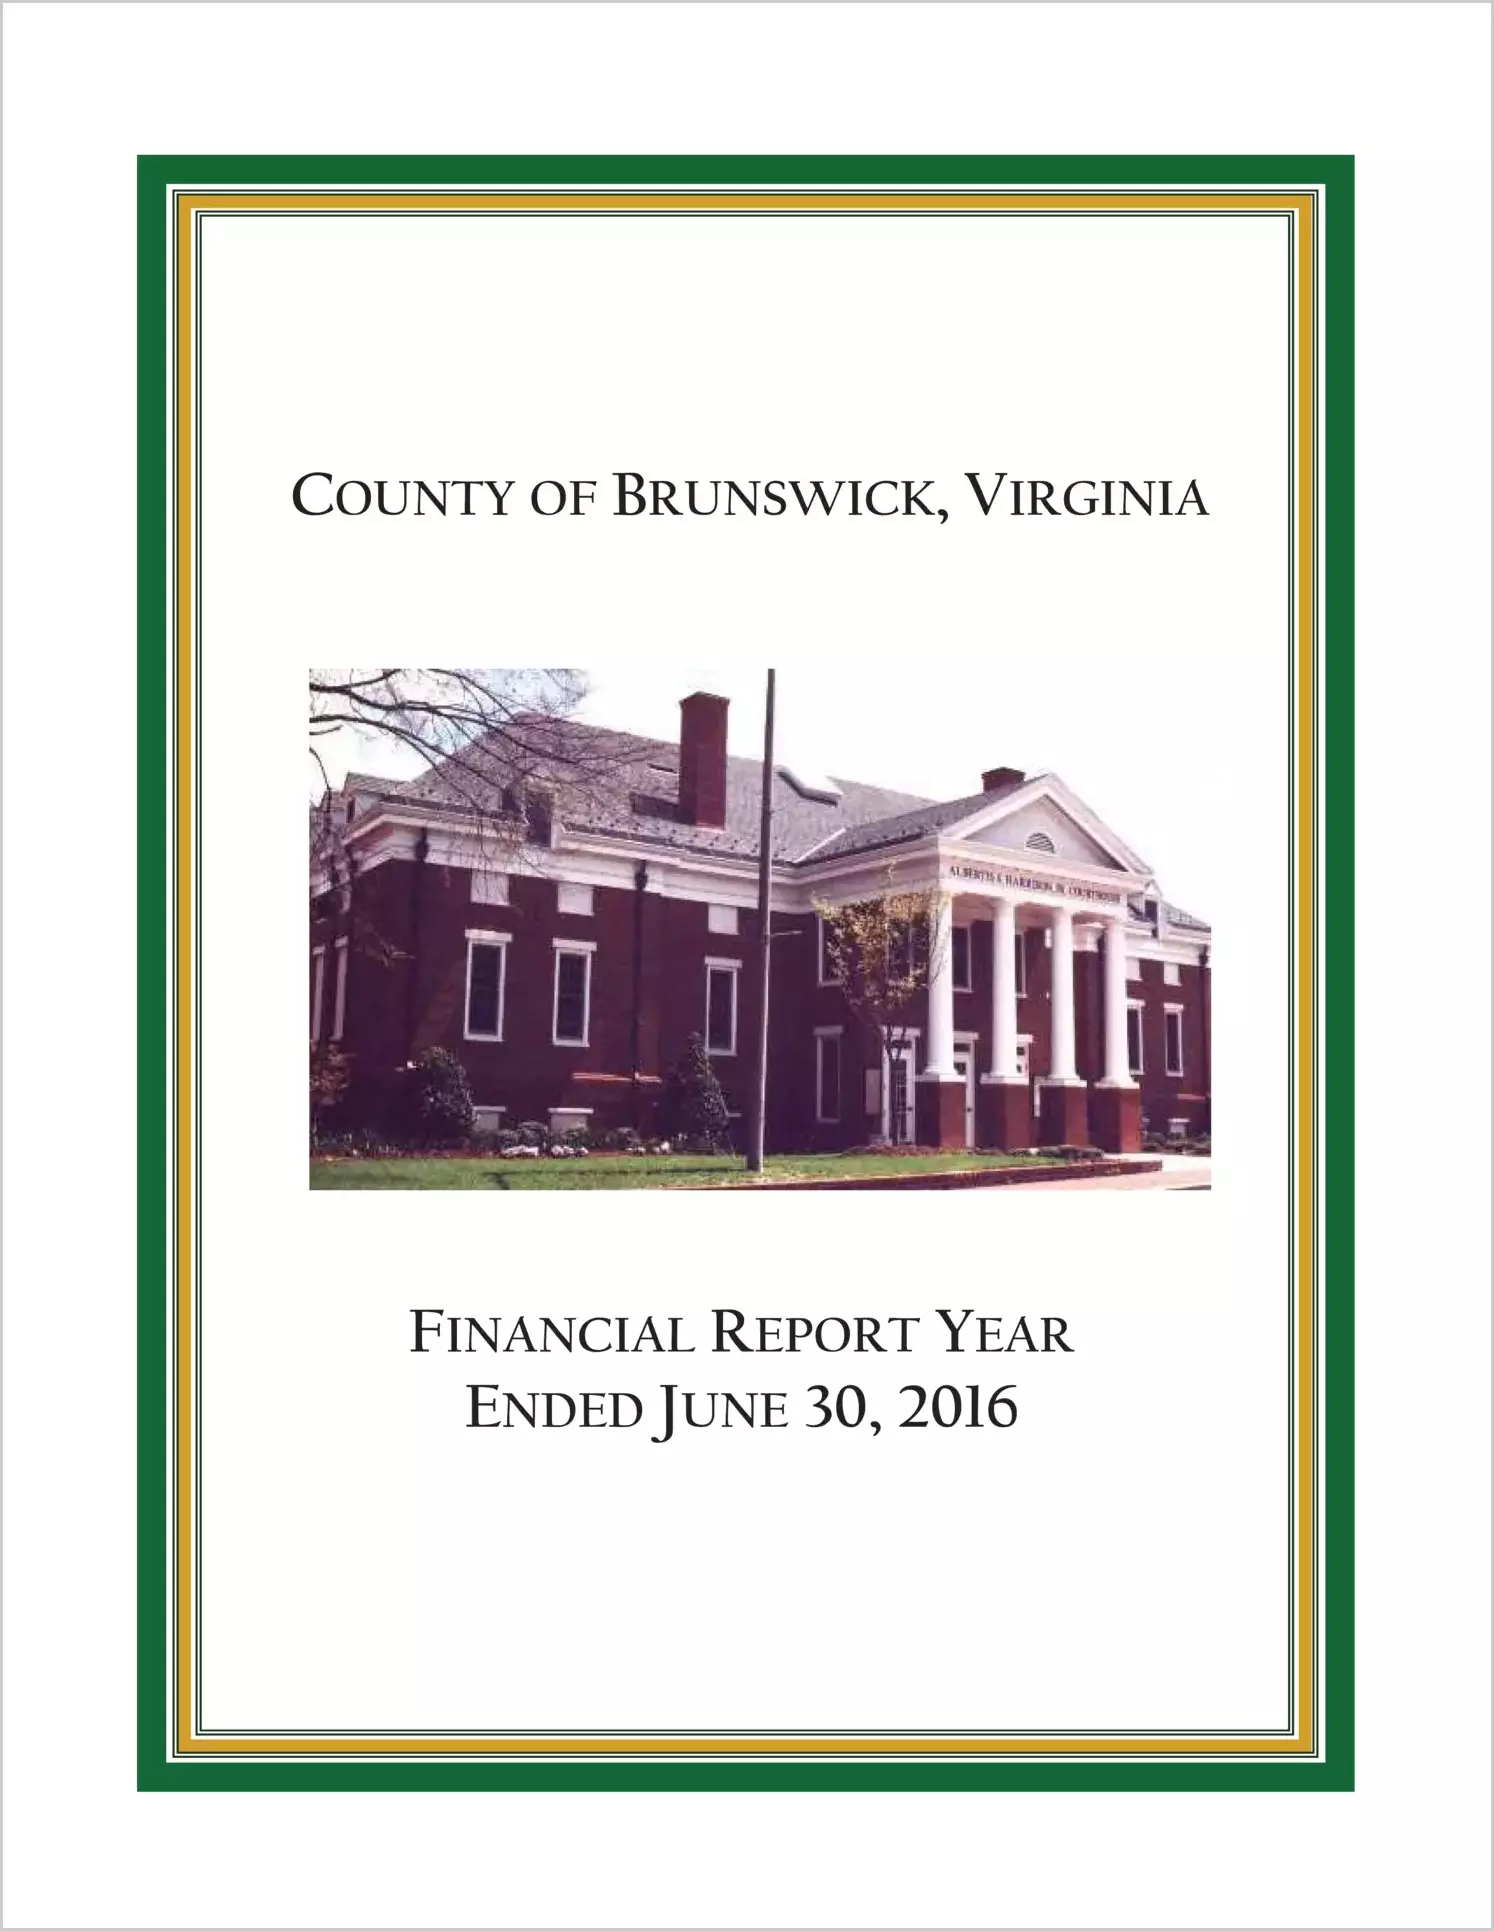 2016 Annual Financial Report for County of Brunswick